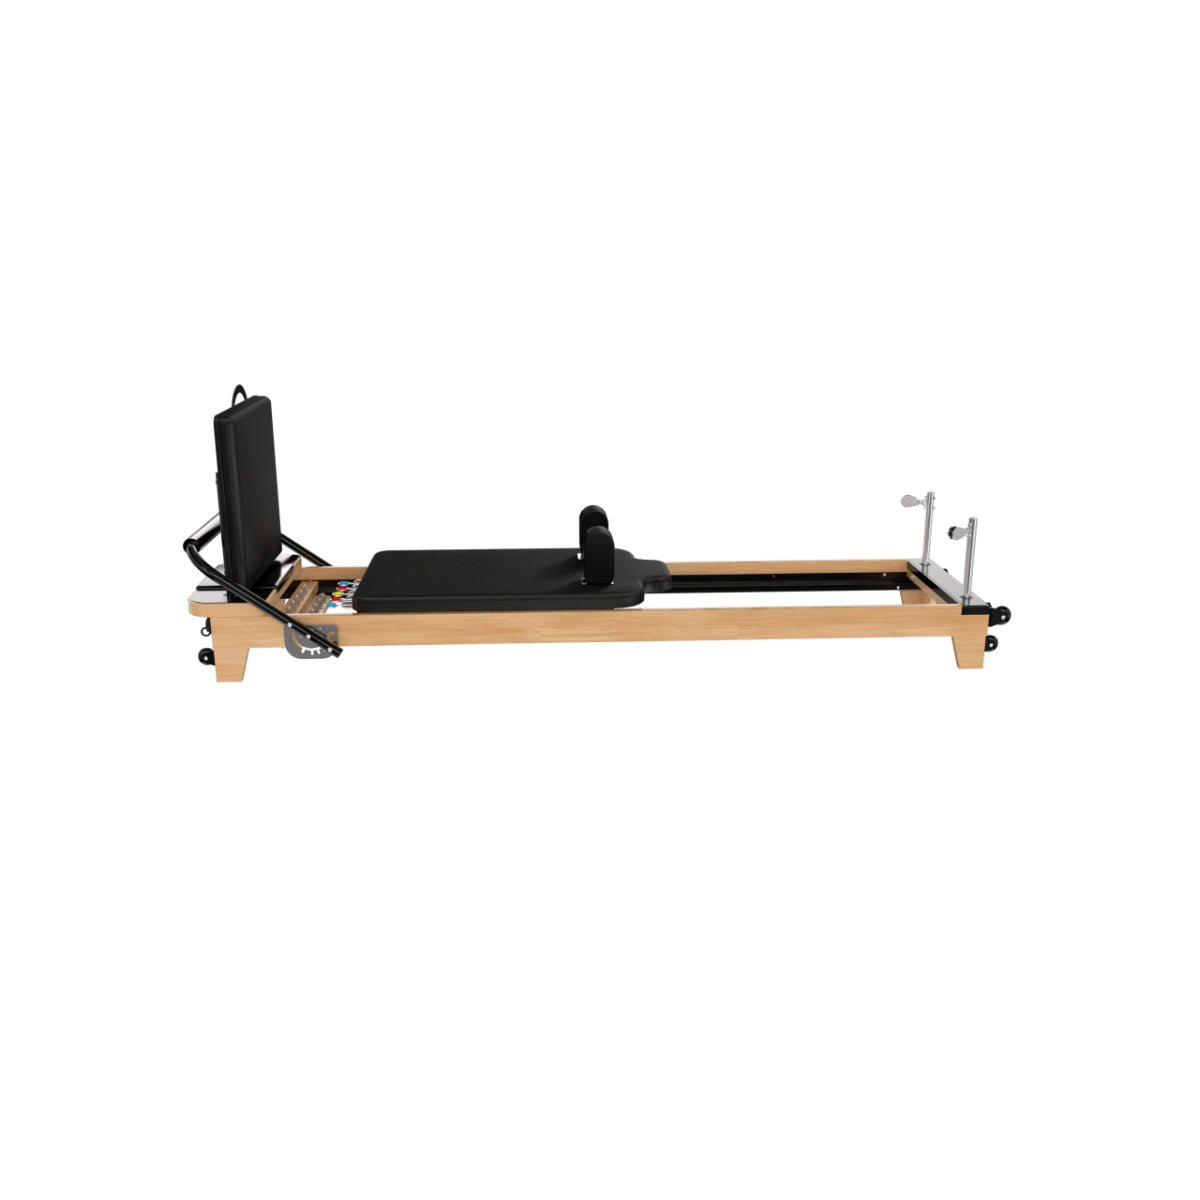 Timber Reformer - Function